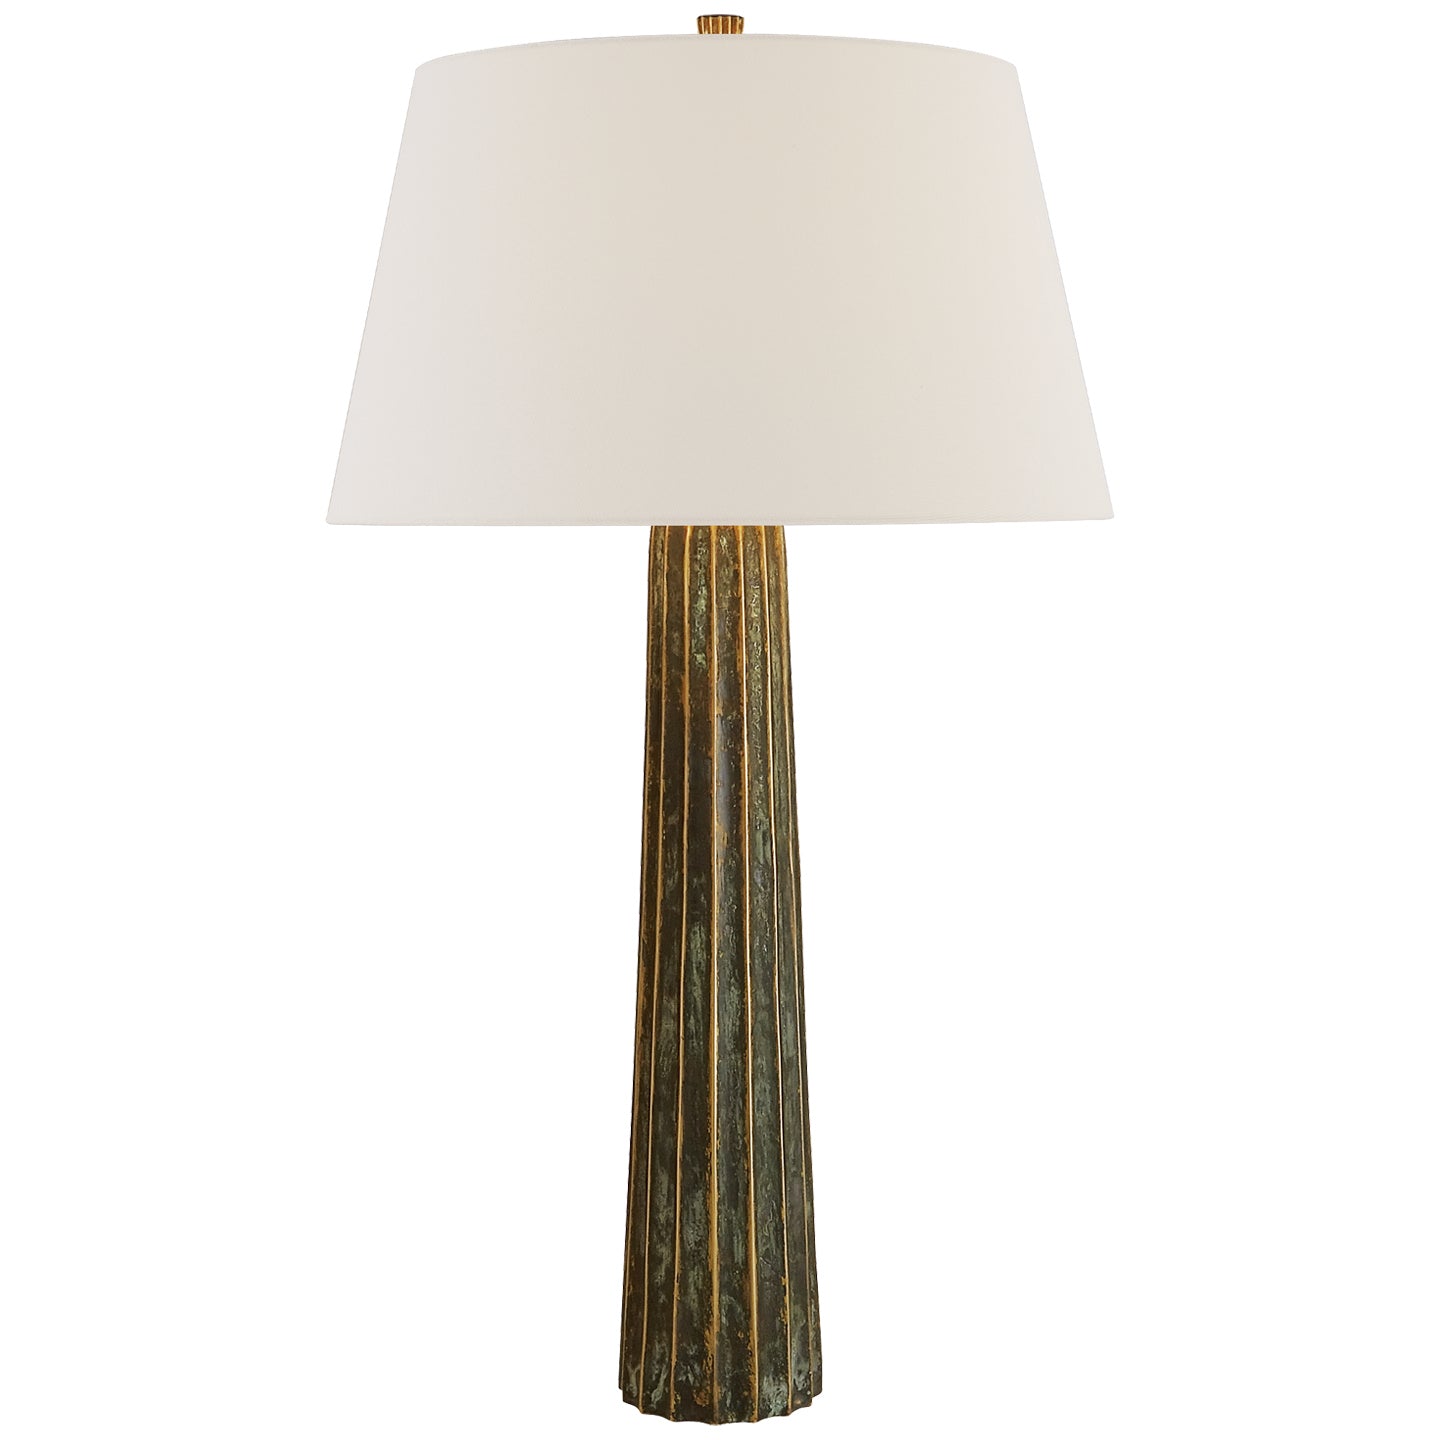 Visual Comfort Signature - CHA 8906BZV-L - One Light Table Lamp - Fluted Spire - Bronze with Verdigris Highlights